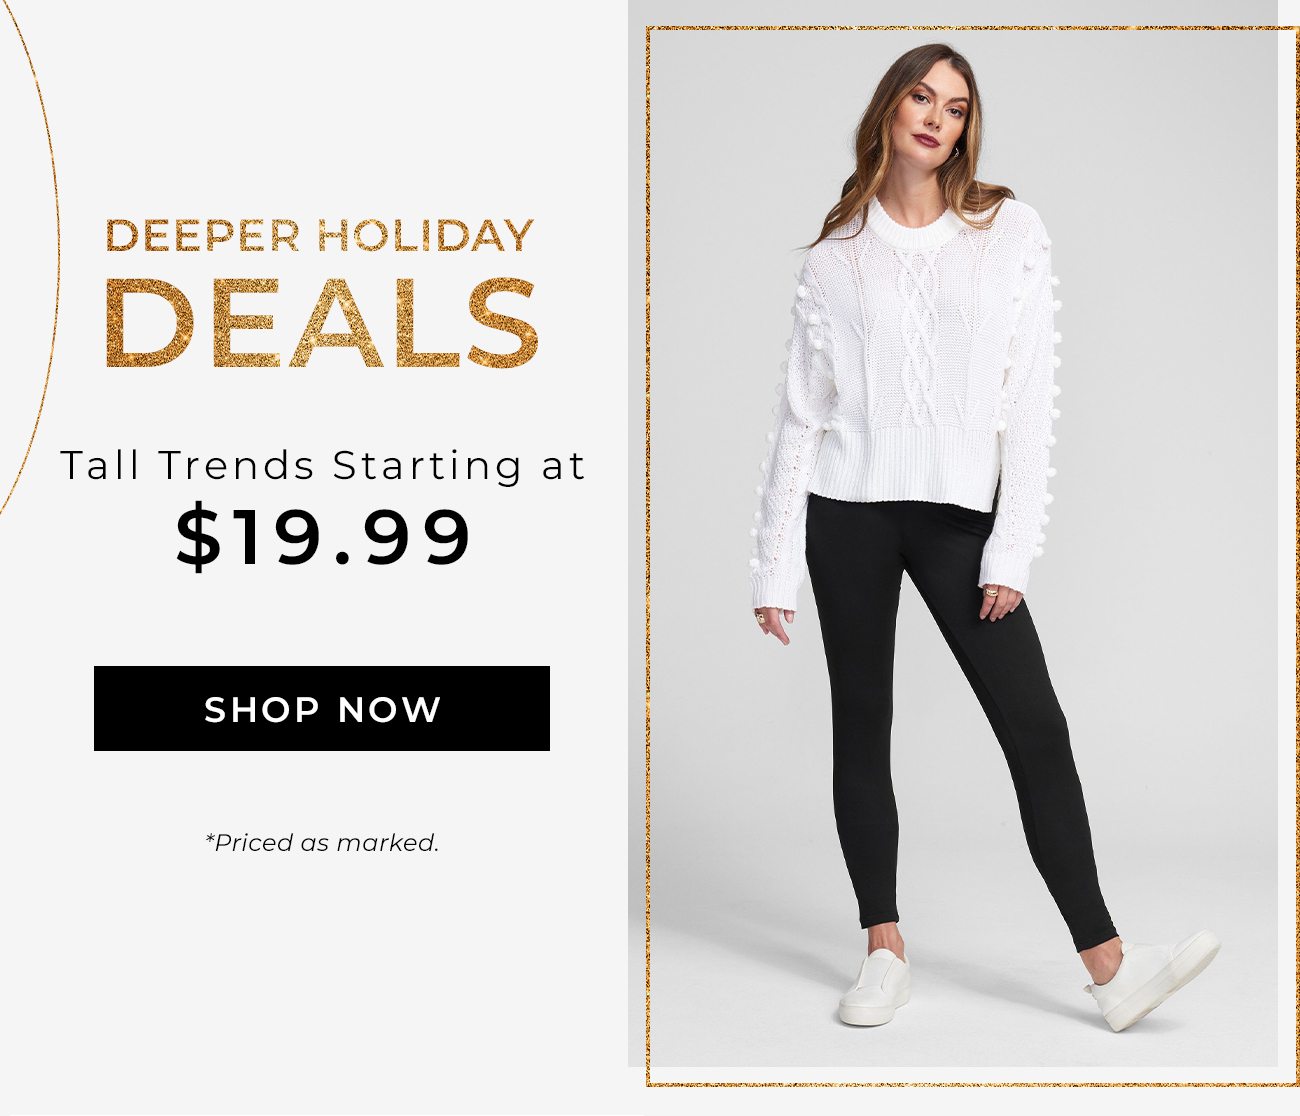 Deeper Holiday Deals - Tall Trends Starting at $19.99